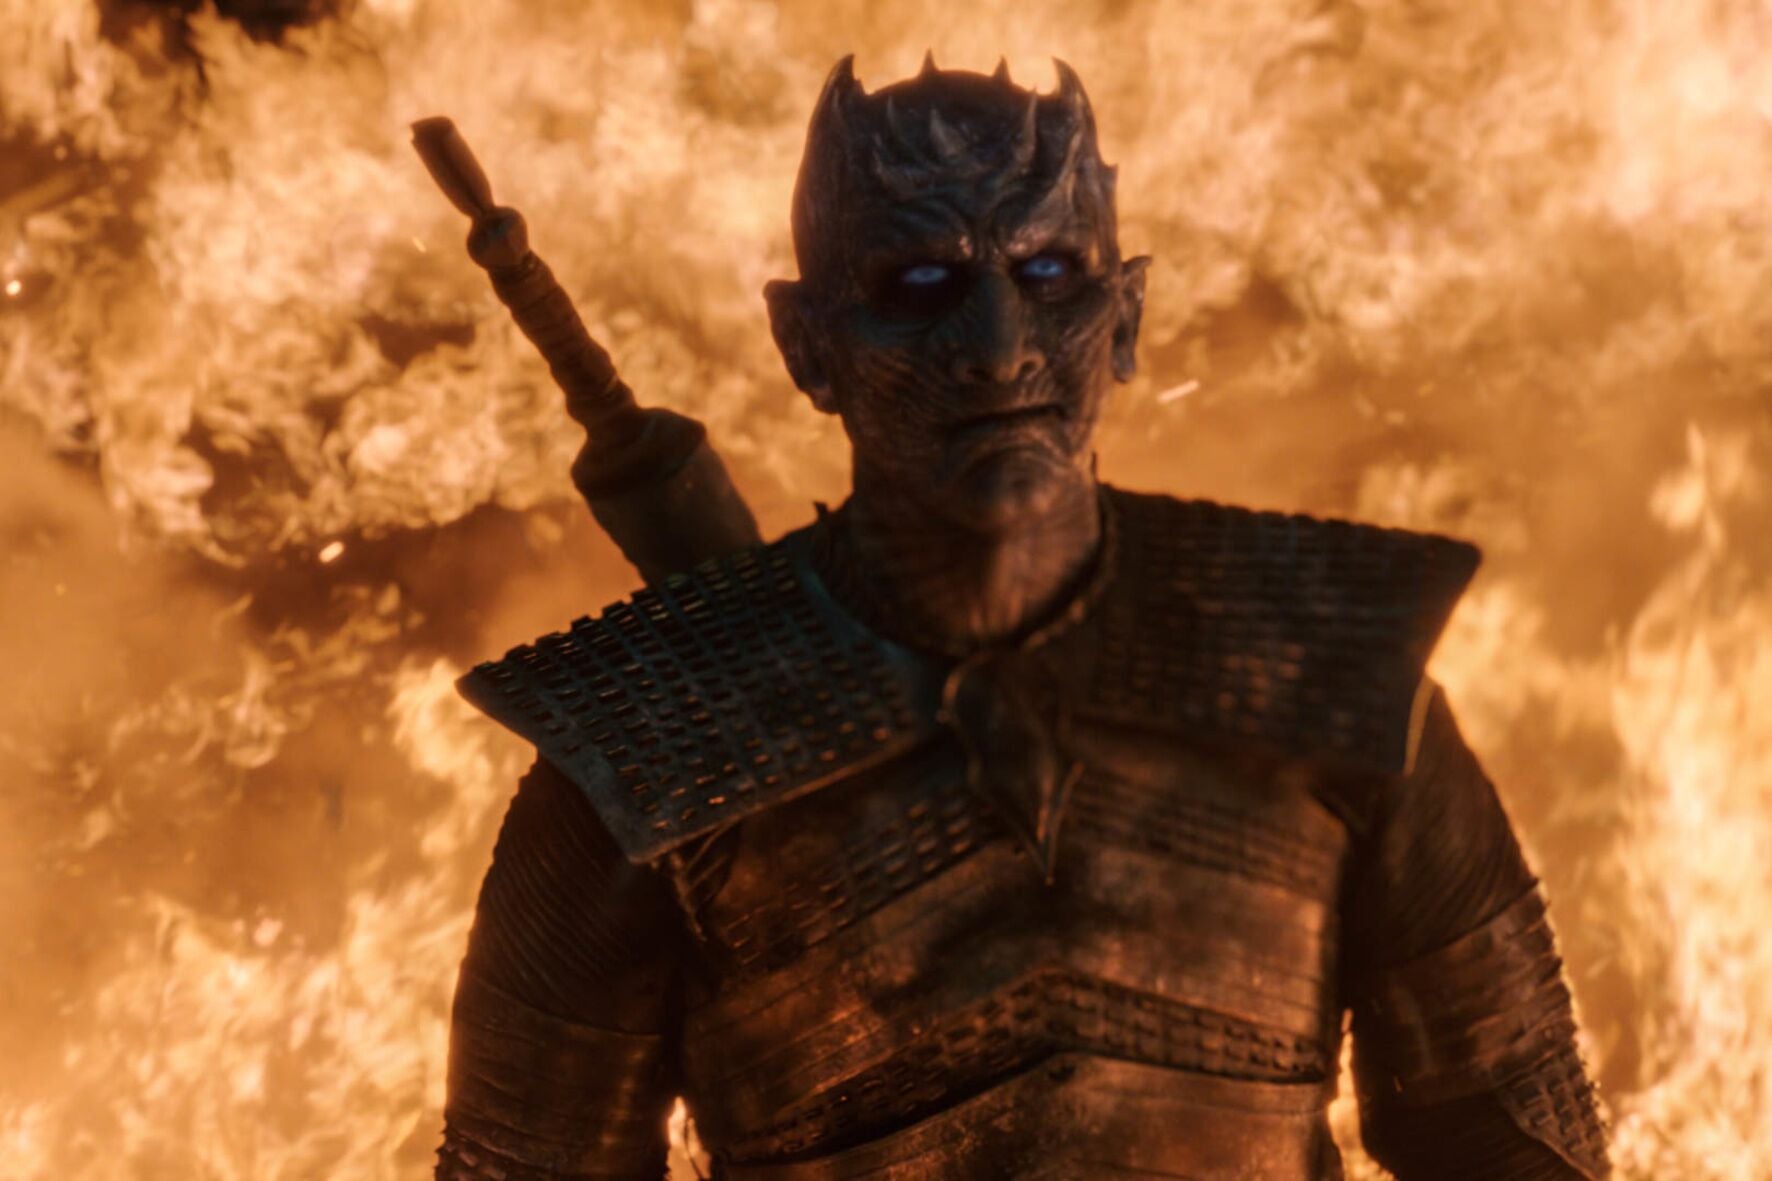 The Night King stands before a wall of fire, with a smirk on his face.